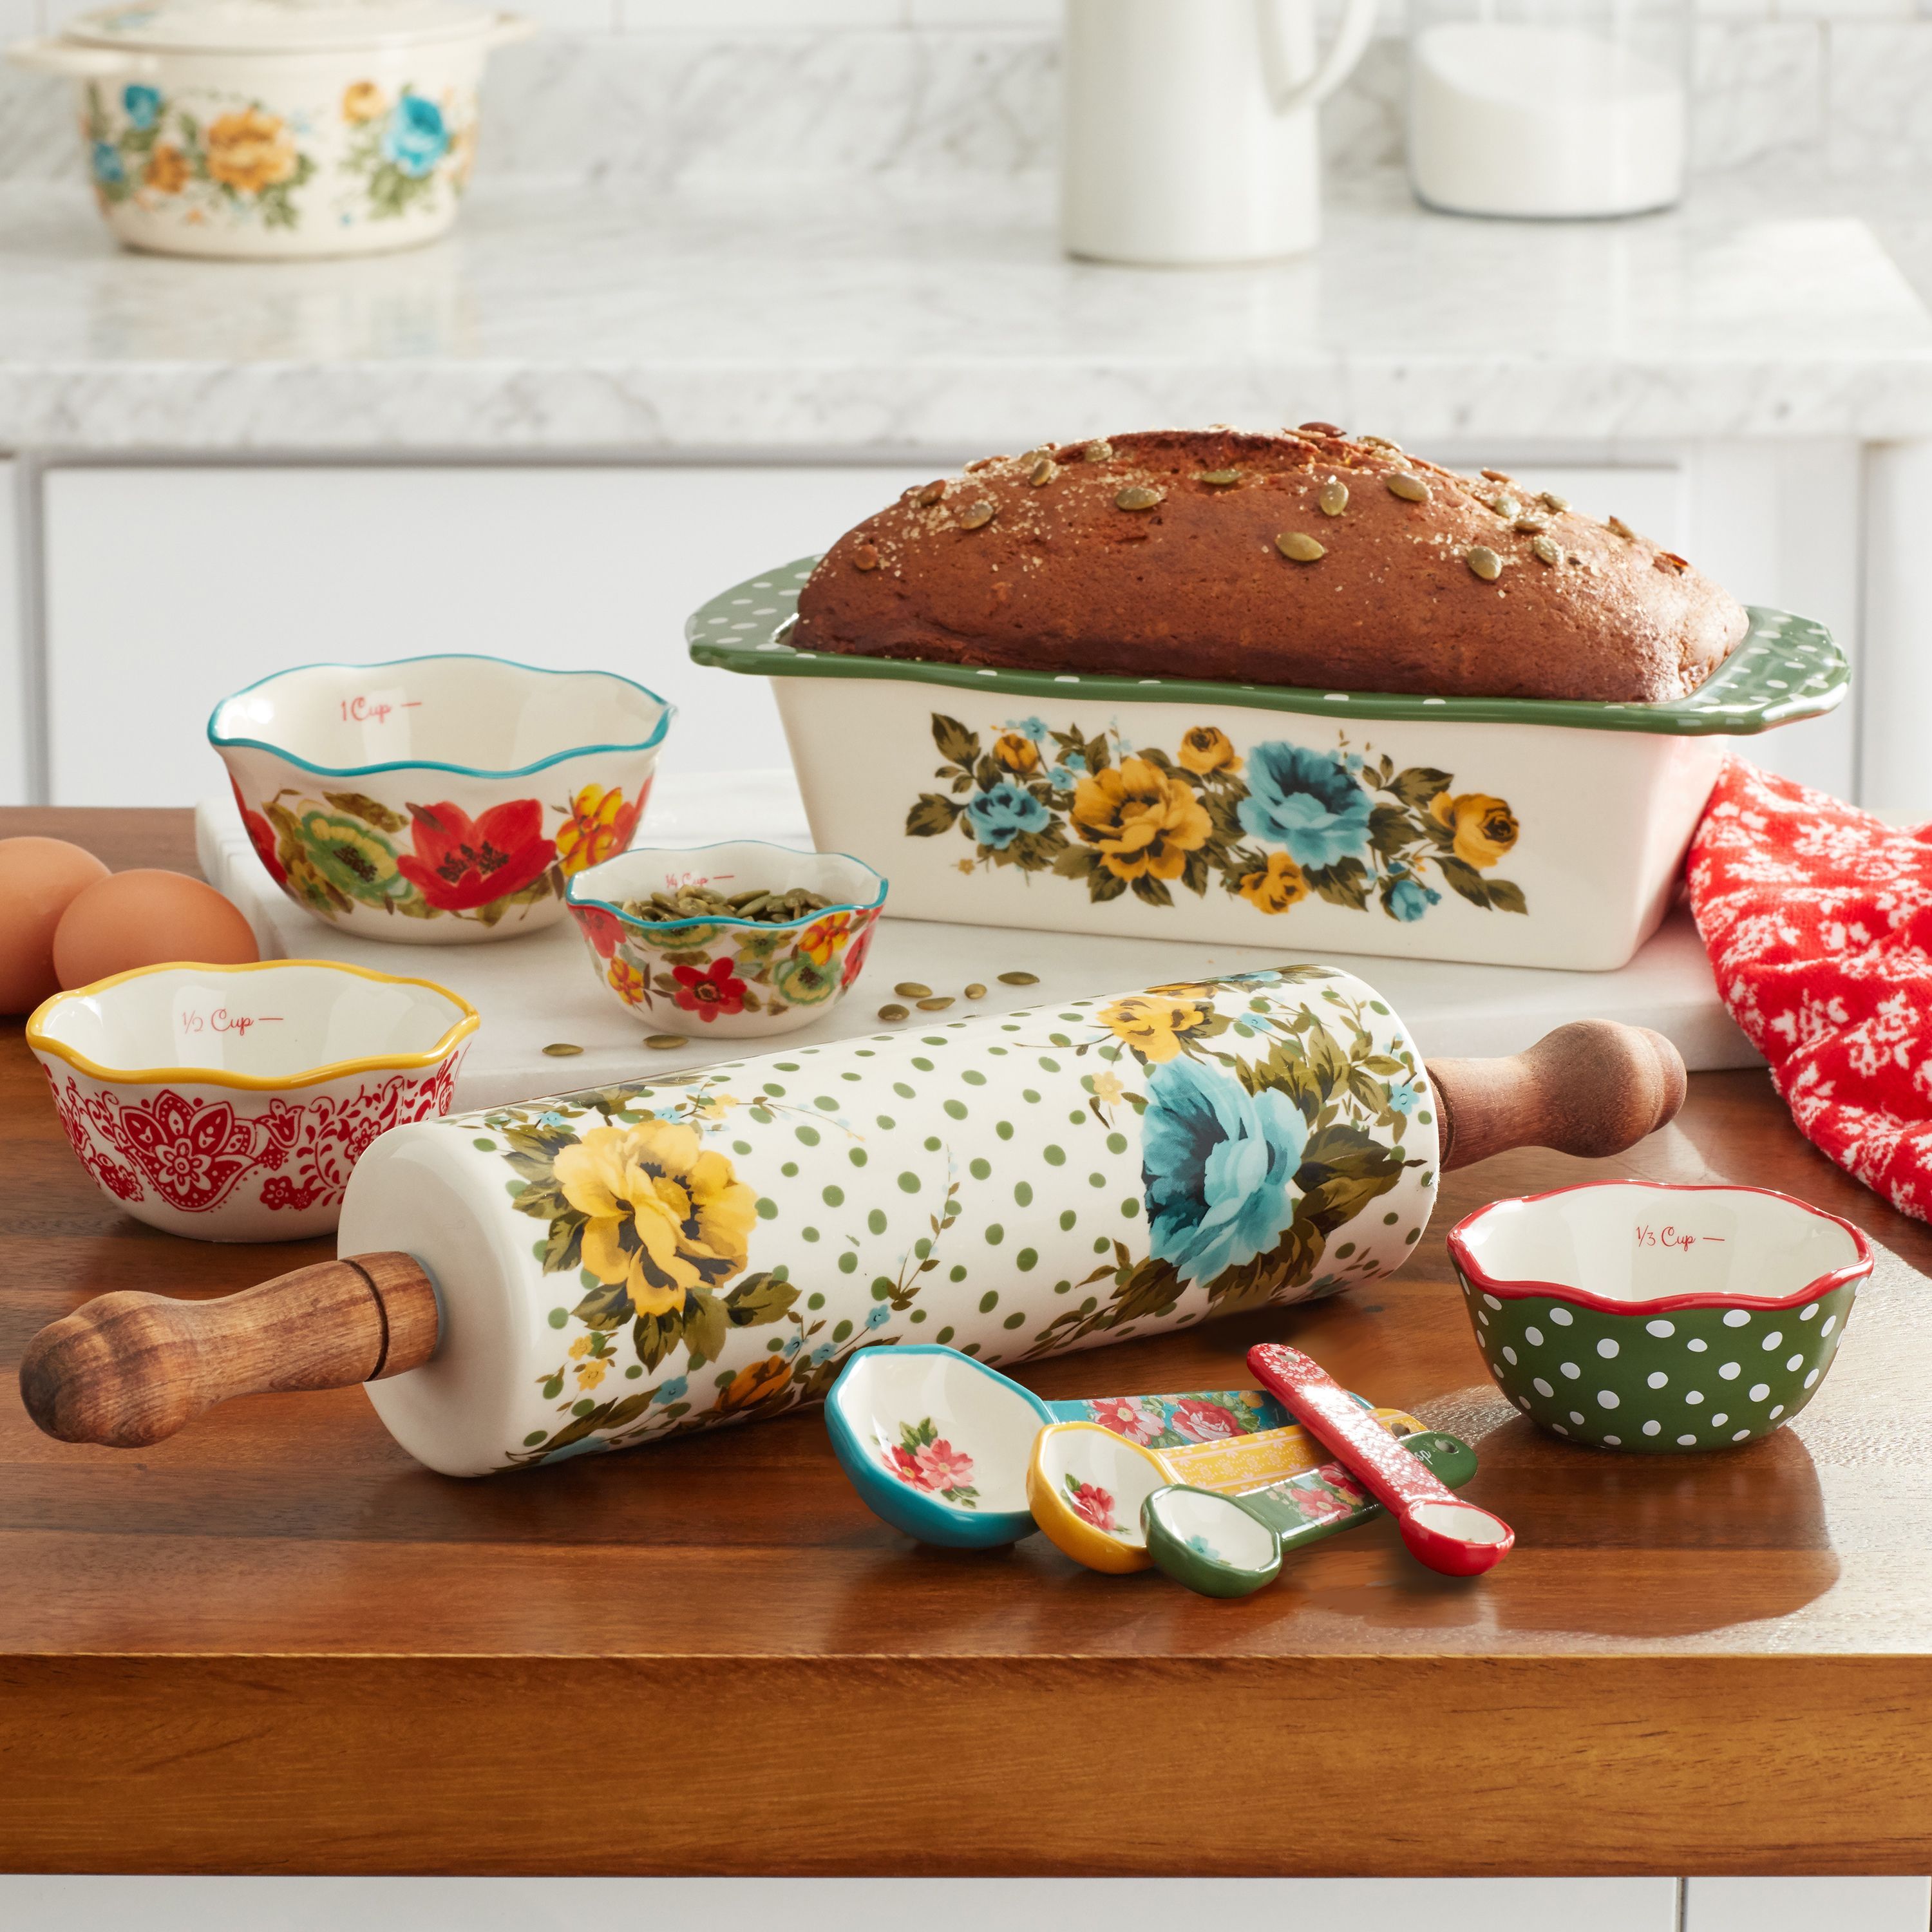 The Pioneer Woman 2-Piece Baker Set Sale at Walmart - Where to Buy